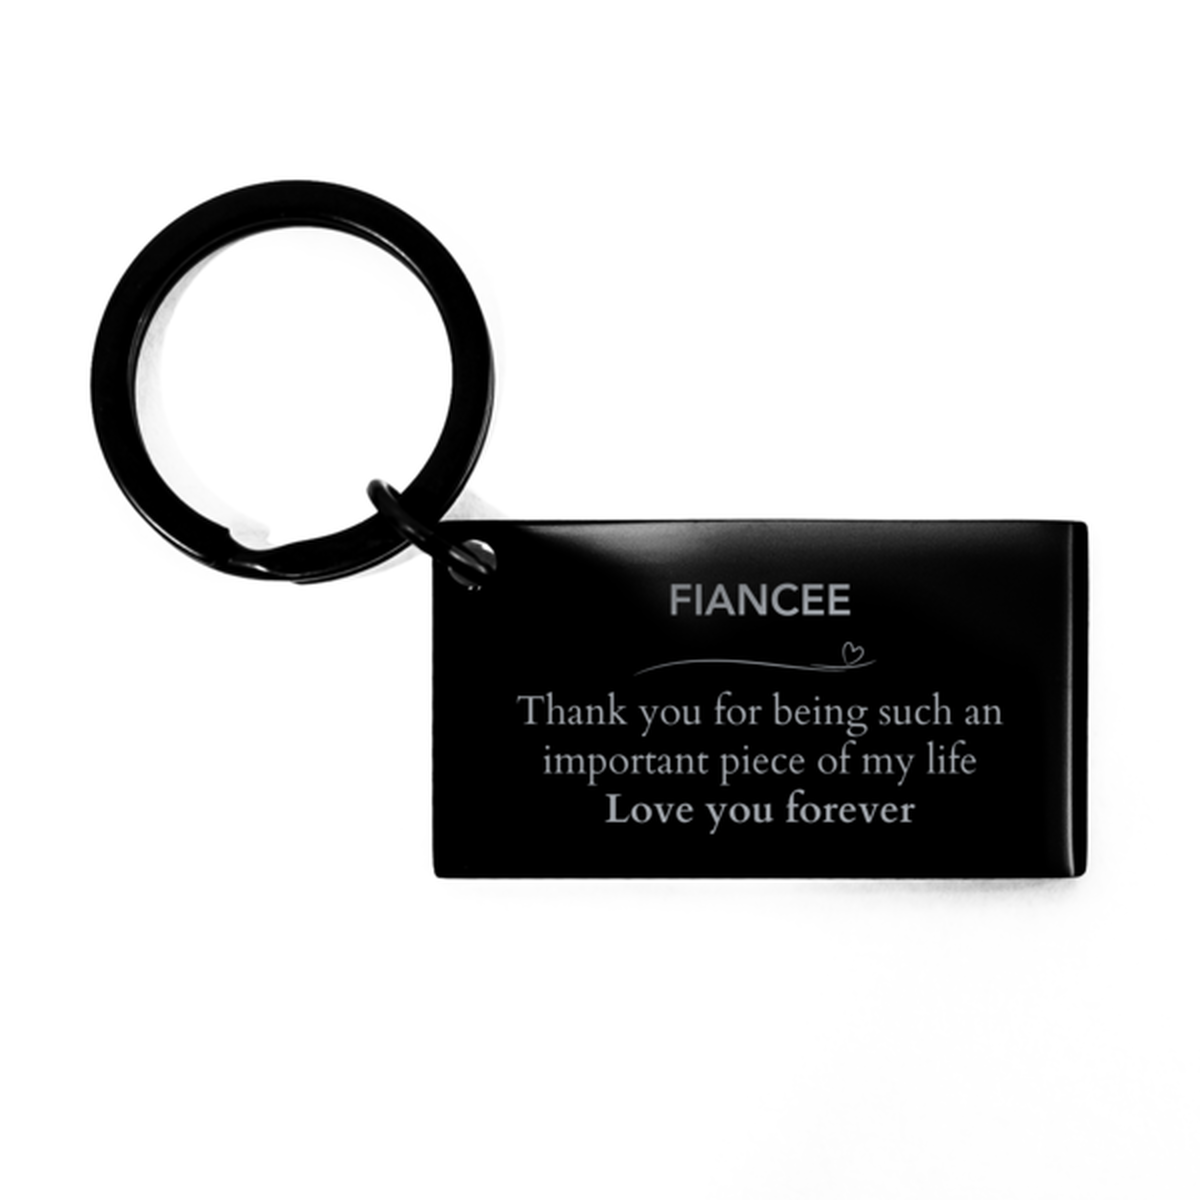 Appropriate Fiancee Keychain Epic Birthday Gifts for Fiancee Thank you for being such an important piece of my life Fiancee Christmas Mothers Fathers Day